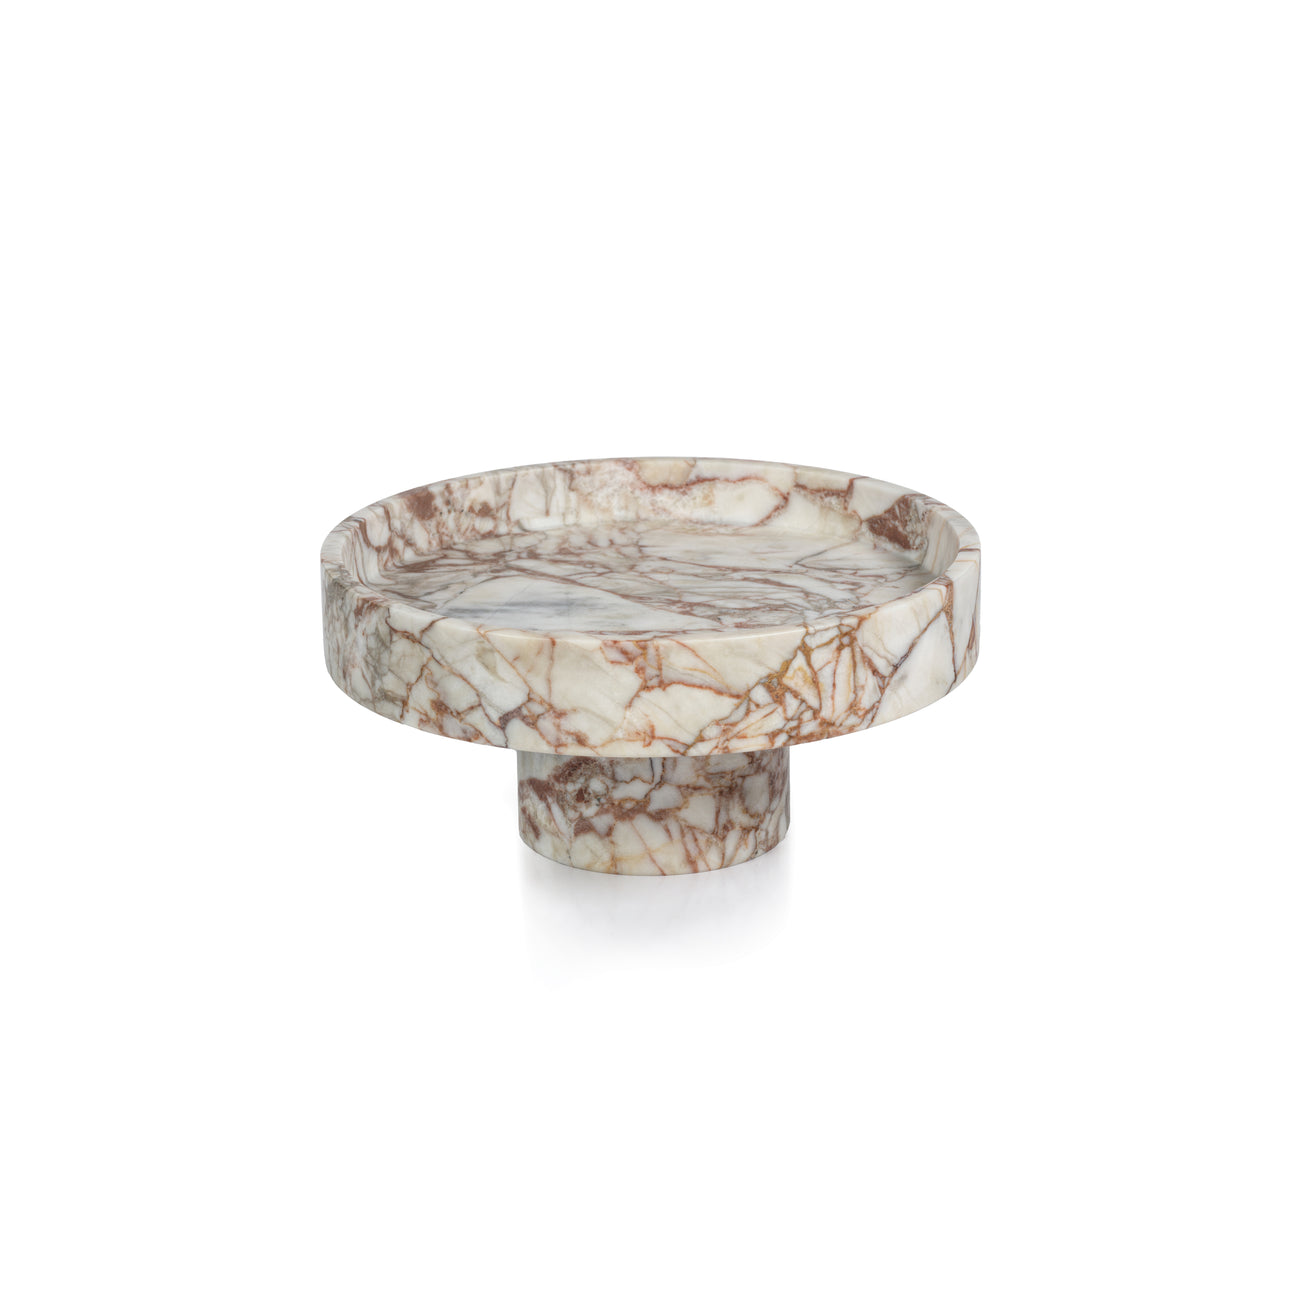 Footed Rosso Verona Marble Bowl